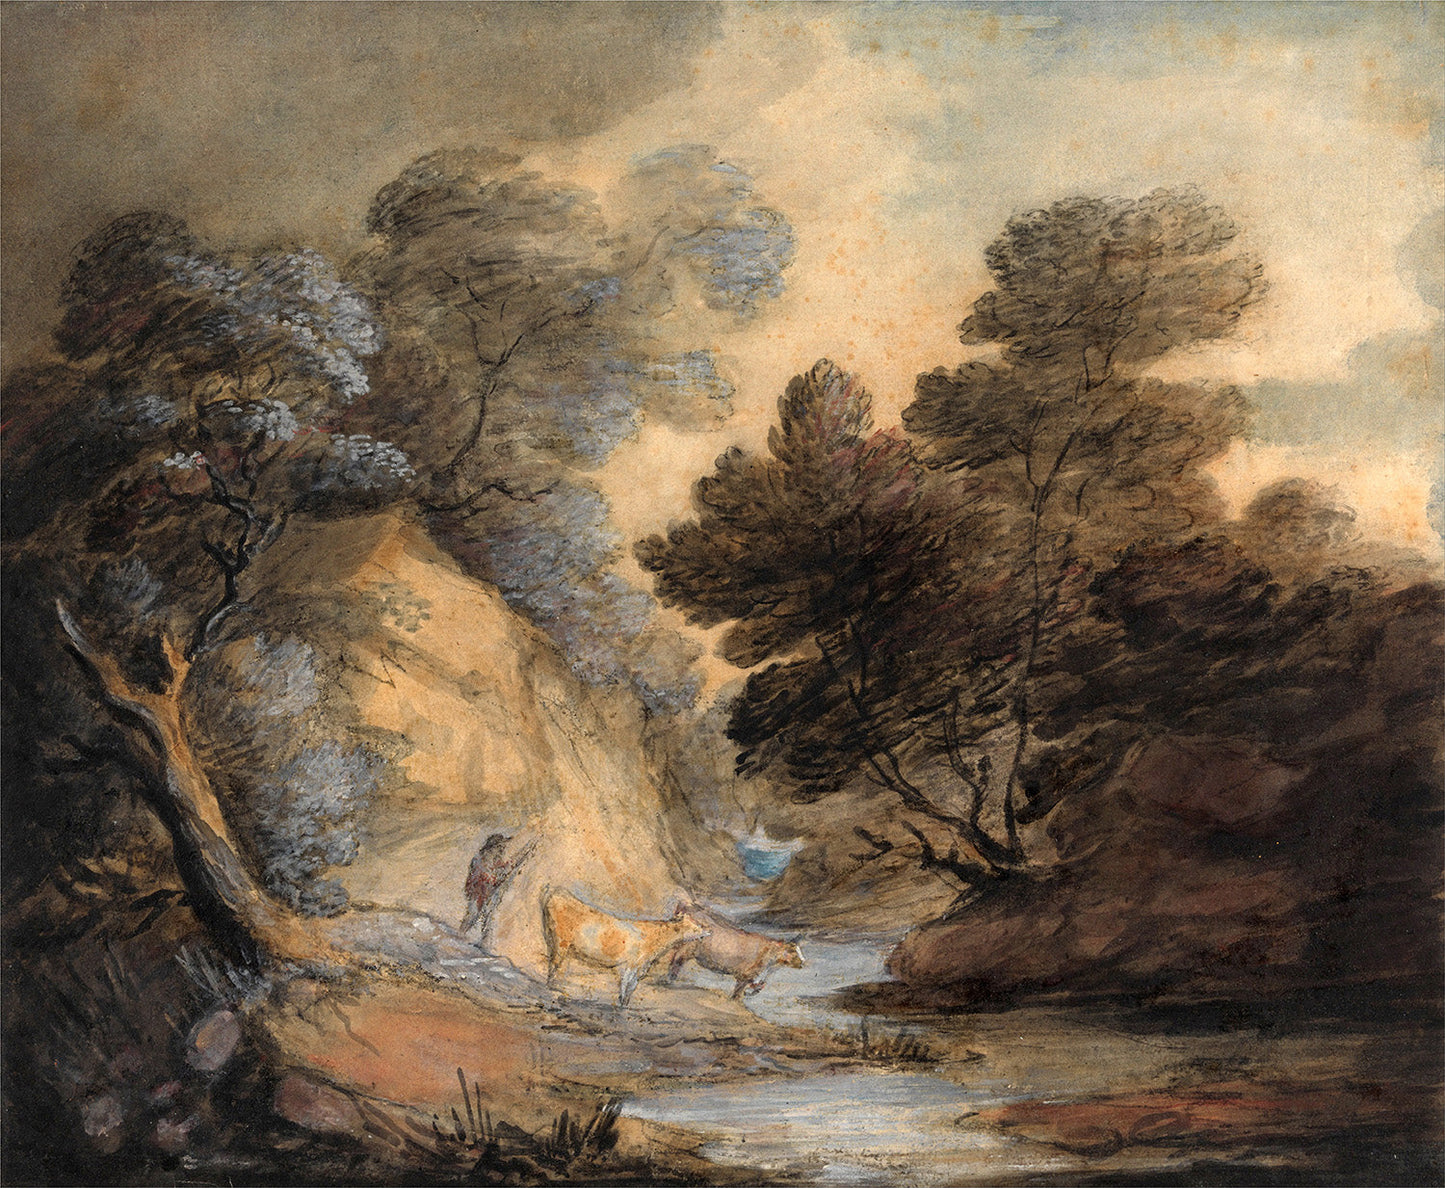 Cattle Watering by a Stream by Thomas Gainsborough Art Print